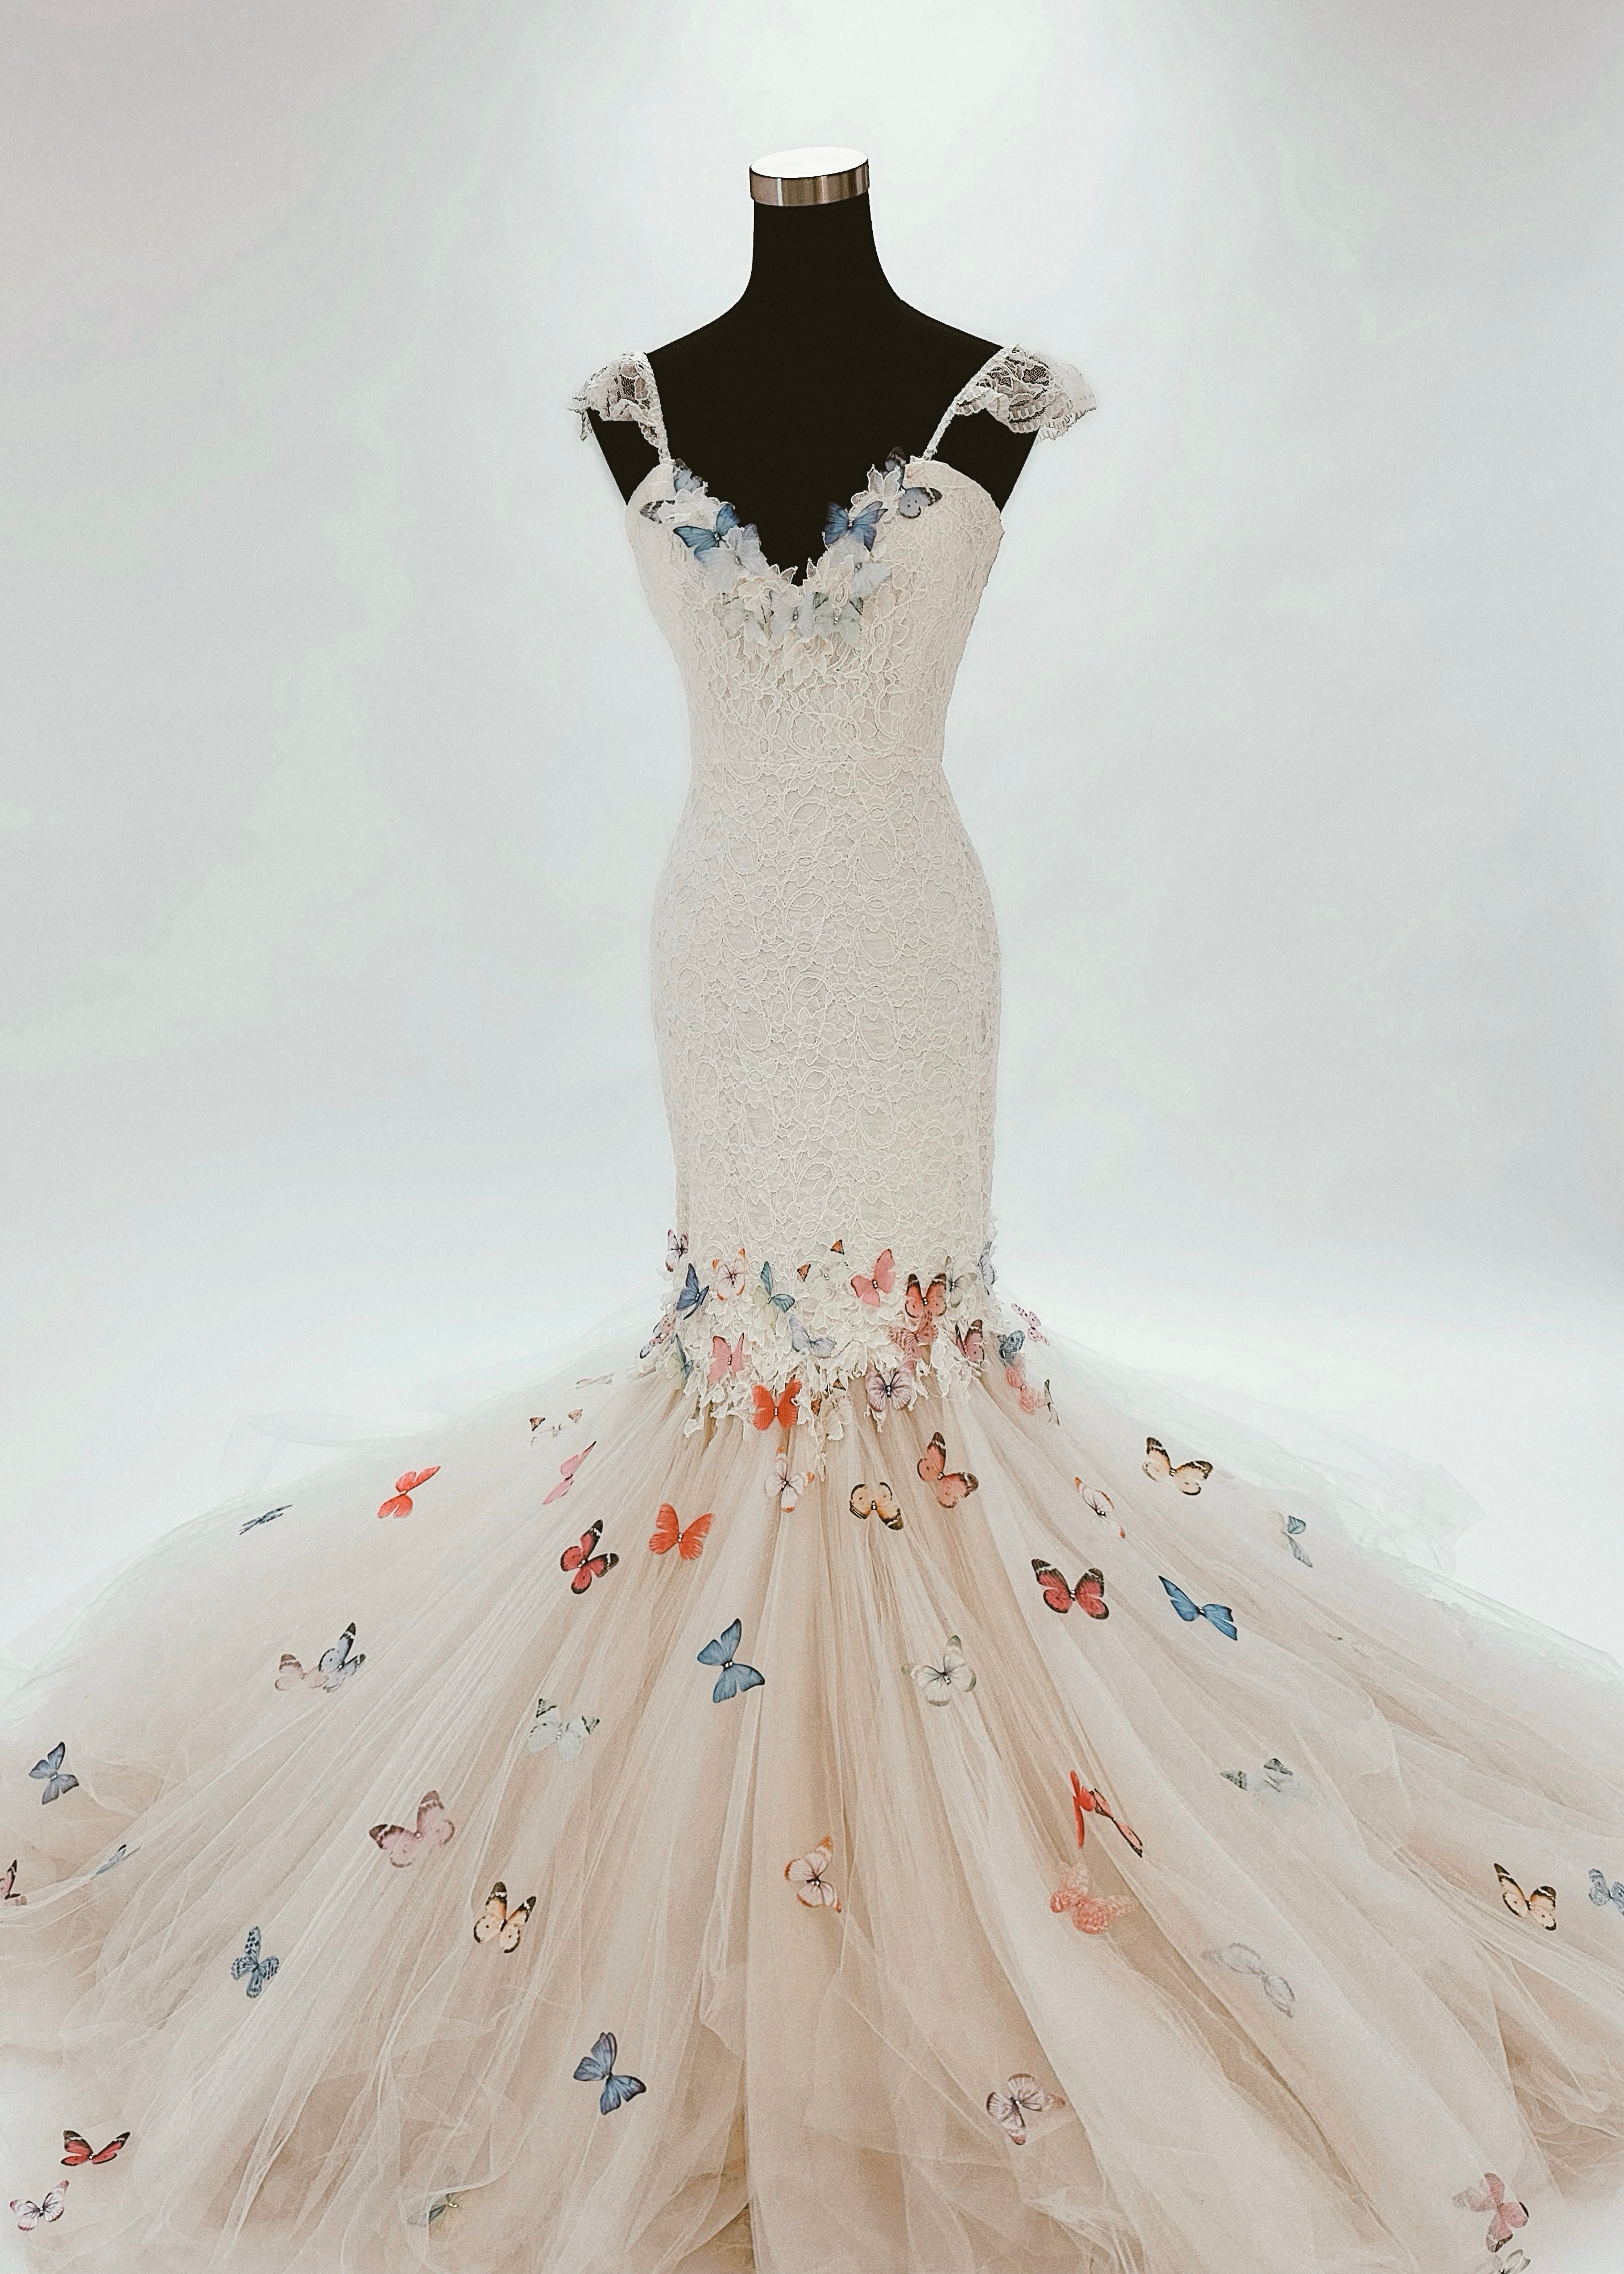 Mermaid wedding dress covered in rainbow butterfly 3D appliques and crystal detailing.